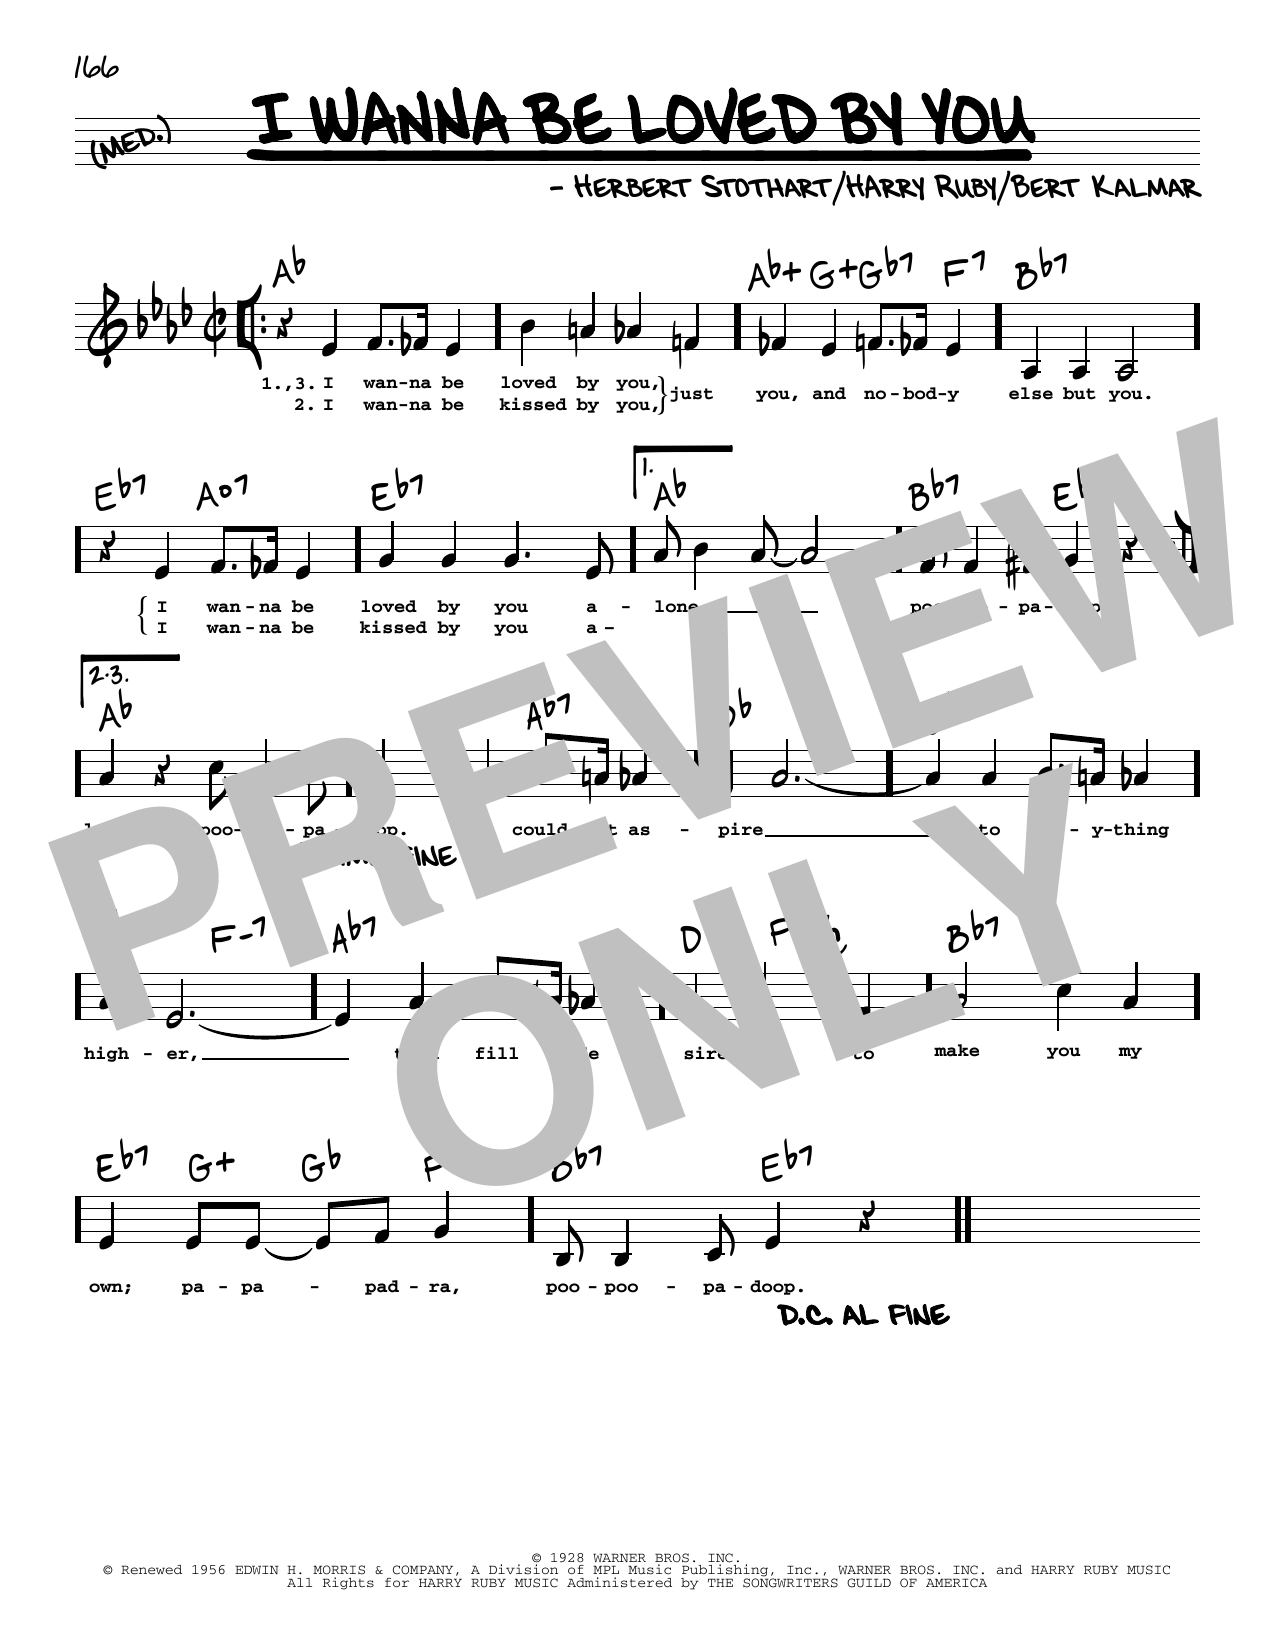 Bert Kalmar I Wanna Be Loved By You (Low Voice) sheet music notes printable PDF score